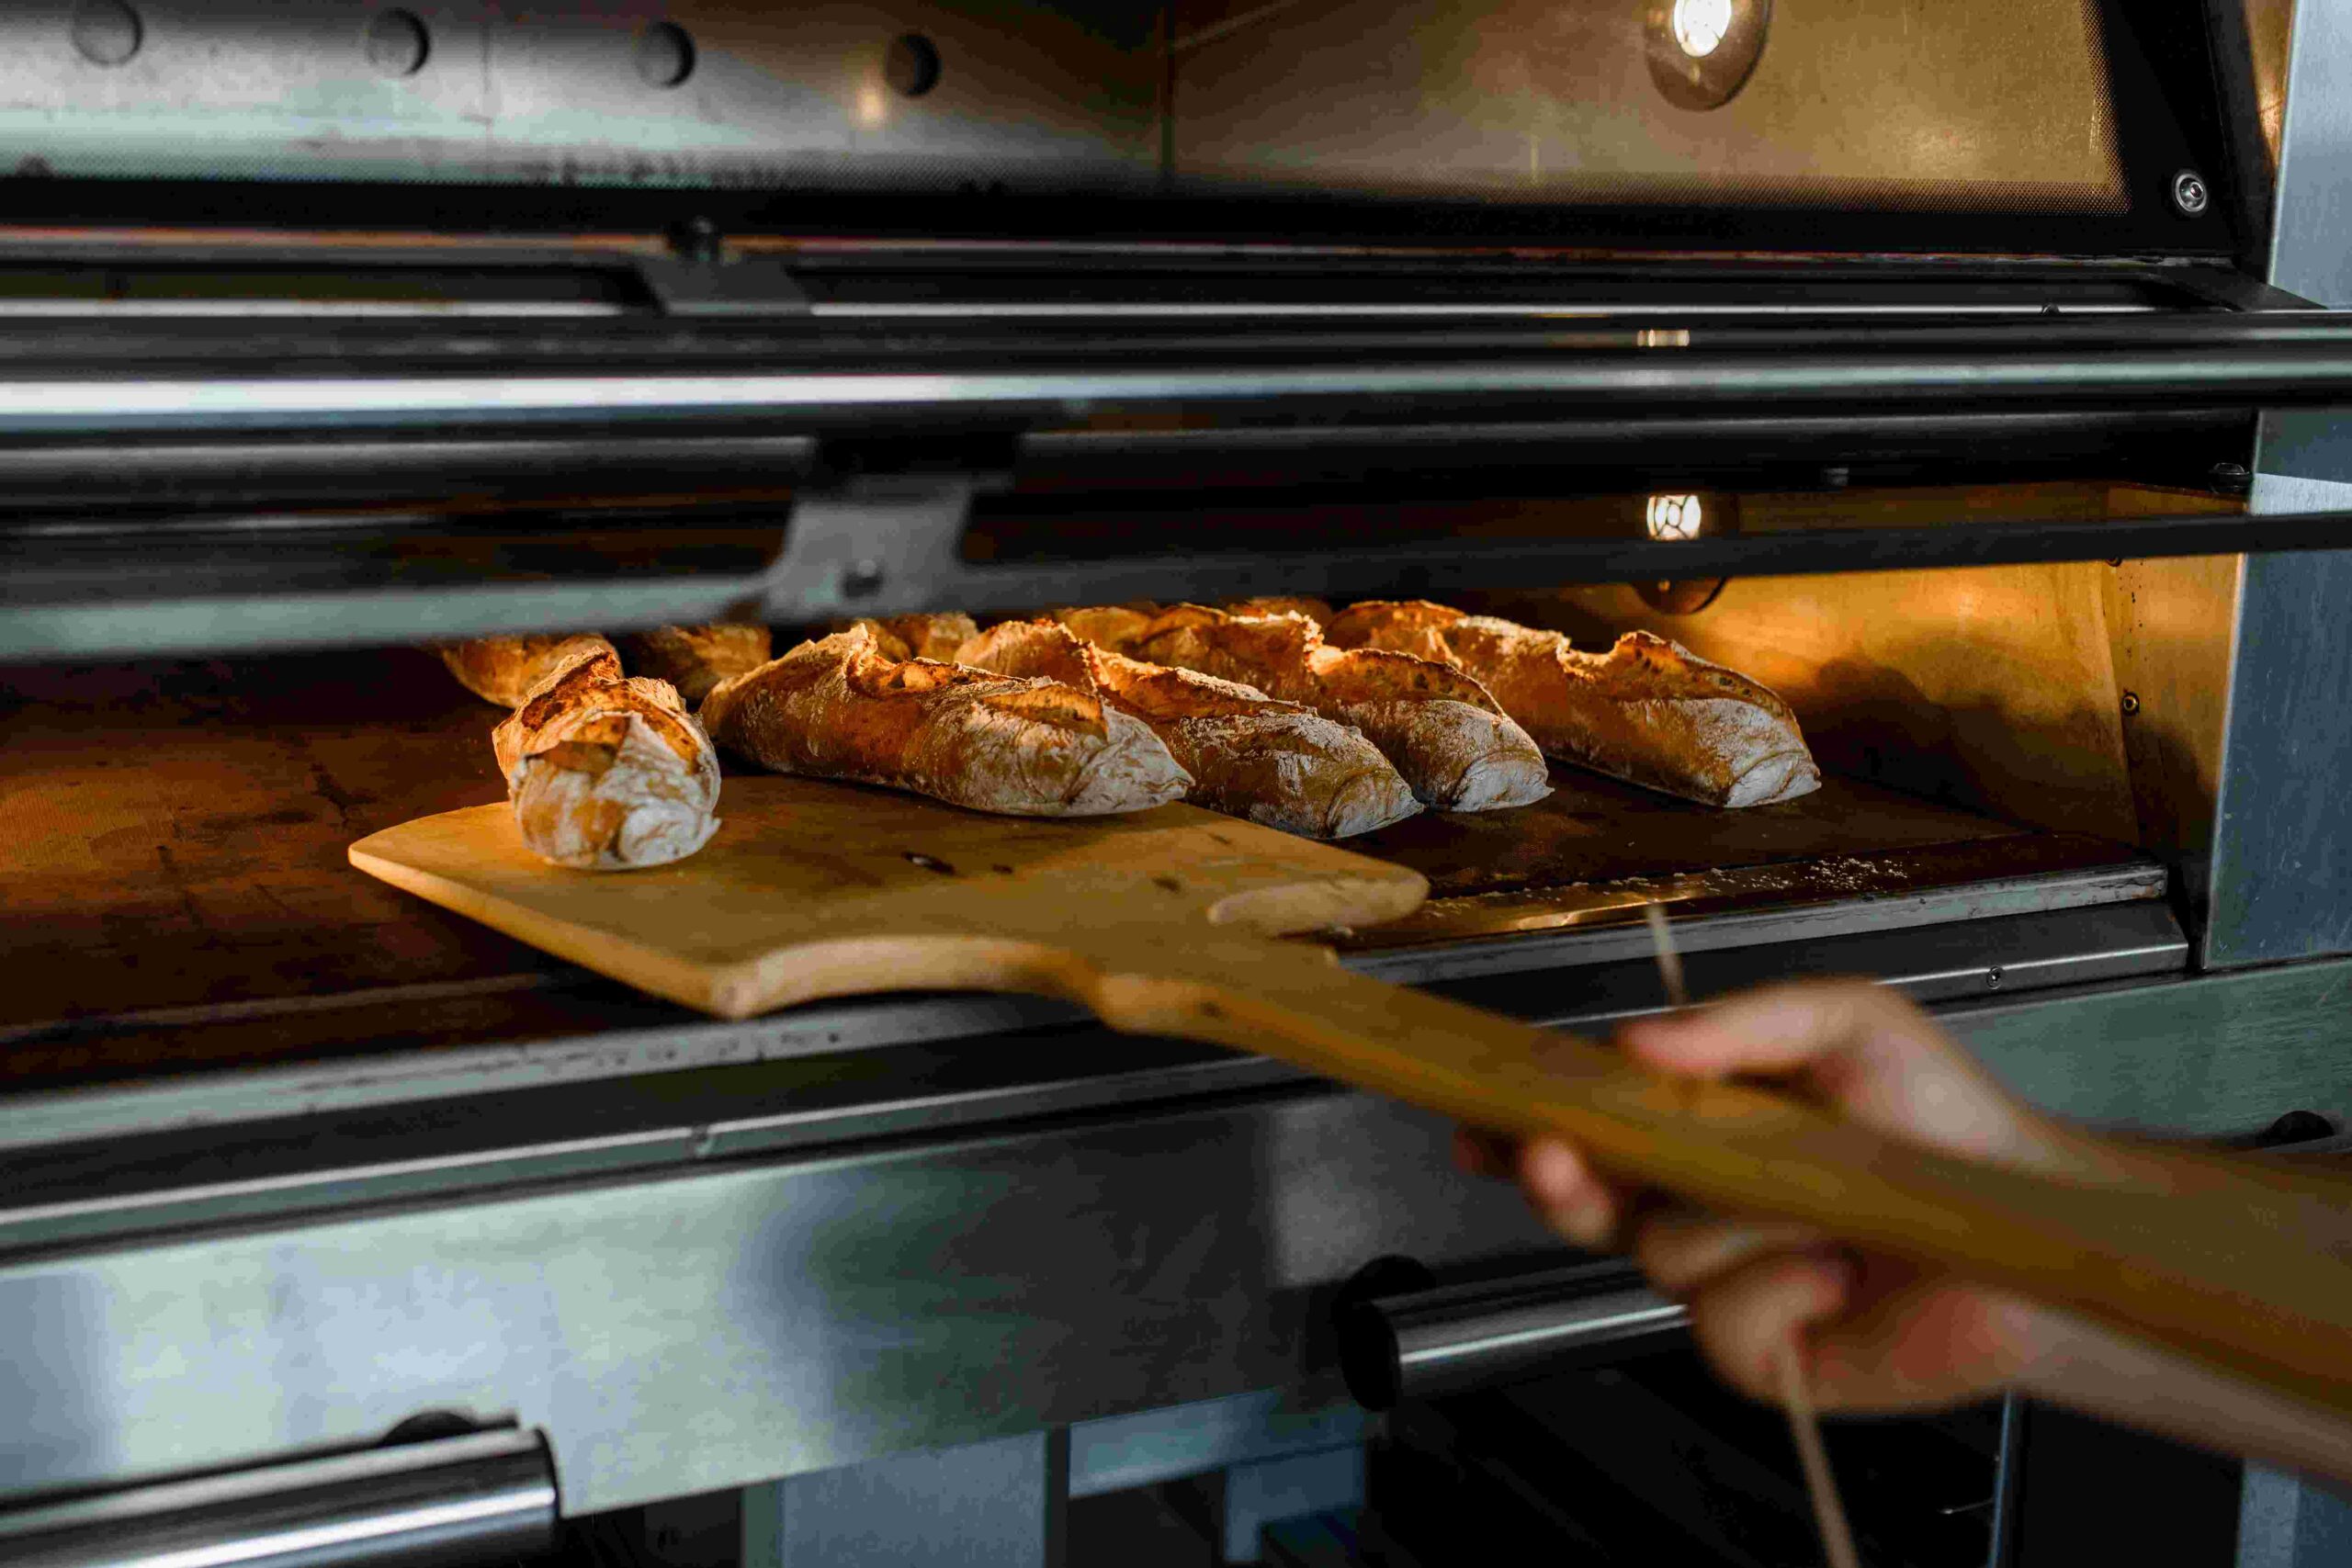 Bakery: installation of a multi-level baking oven